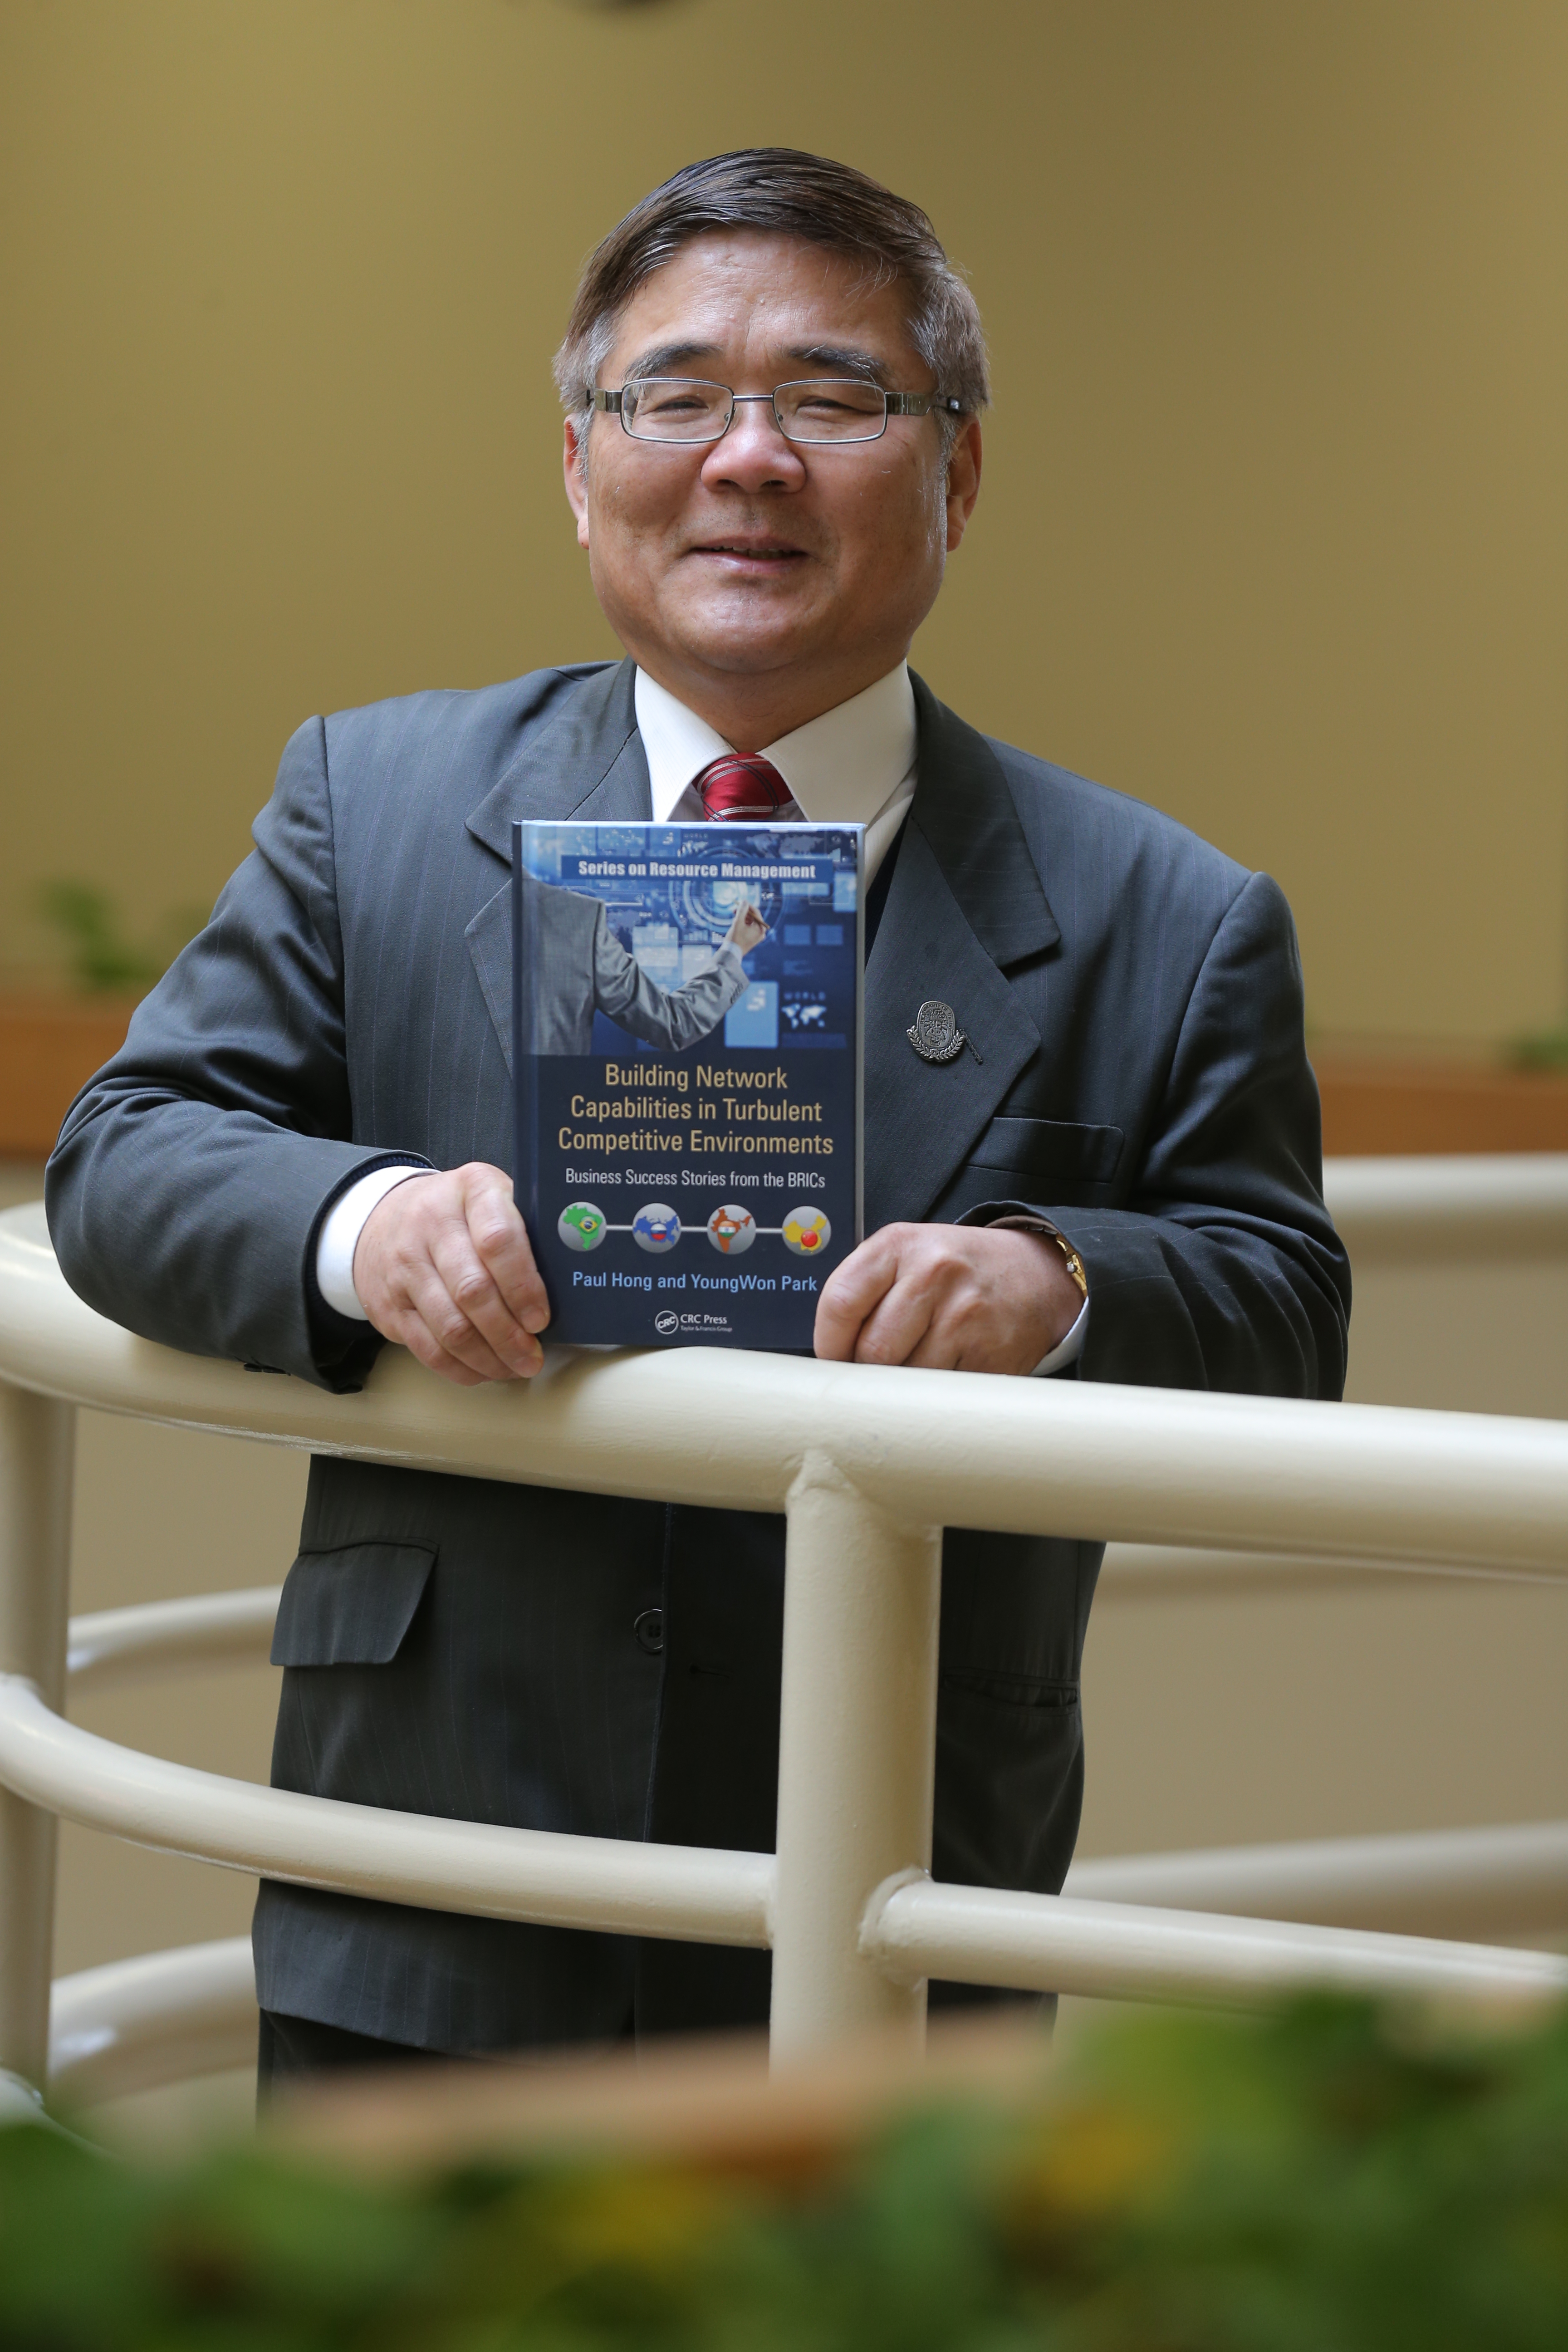 Dr. Hong and his new book